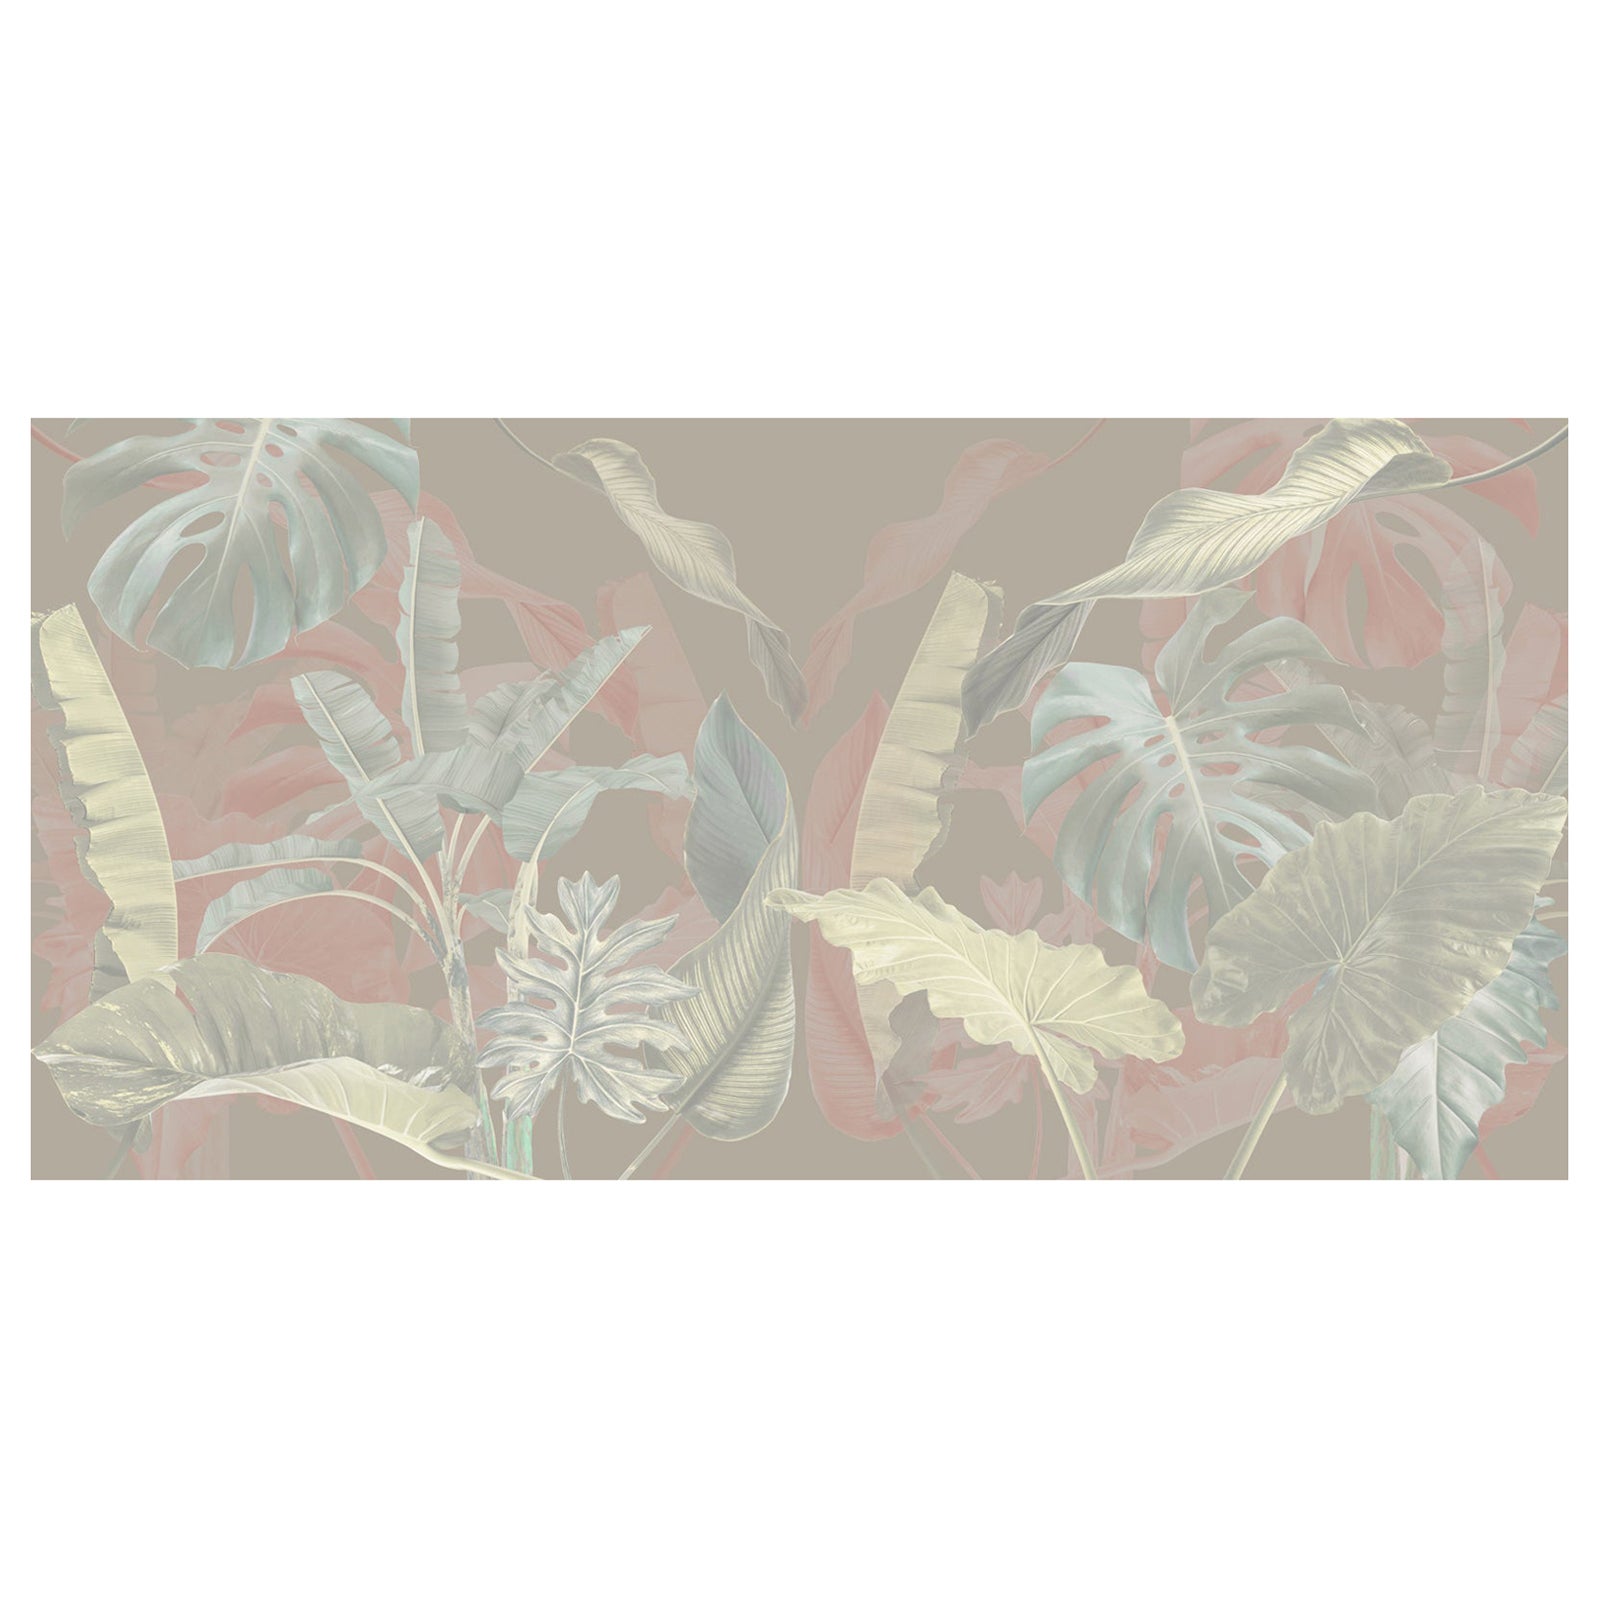 EDGE Collections JungleScape Nightfall; a whimsical nod to endless Summers For Sale